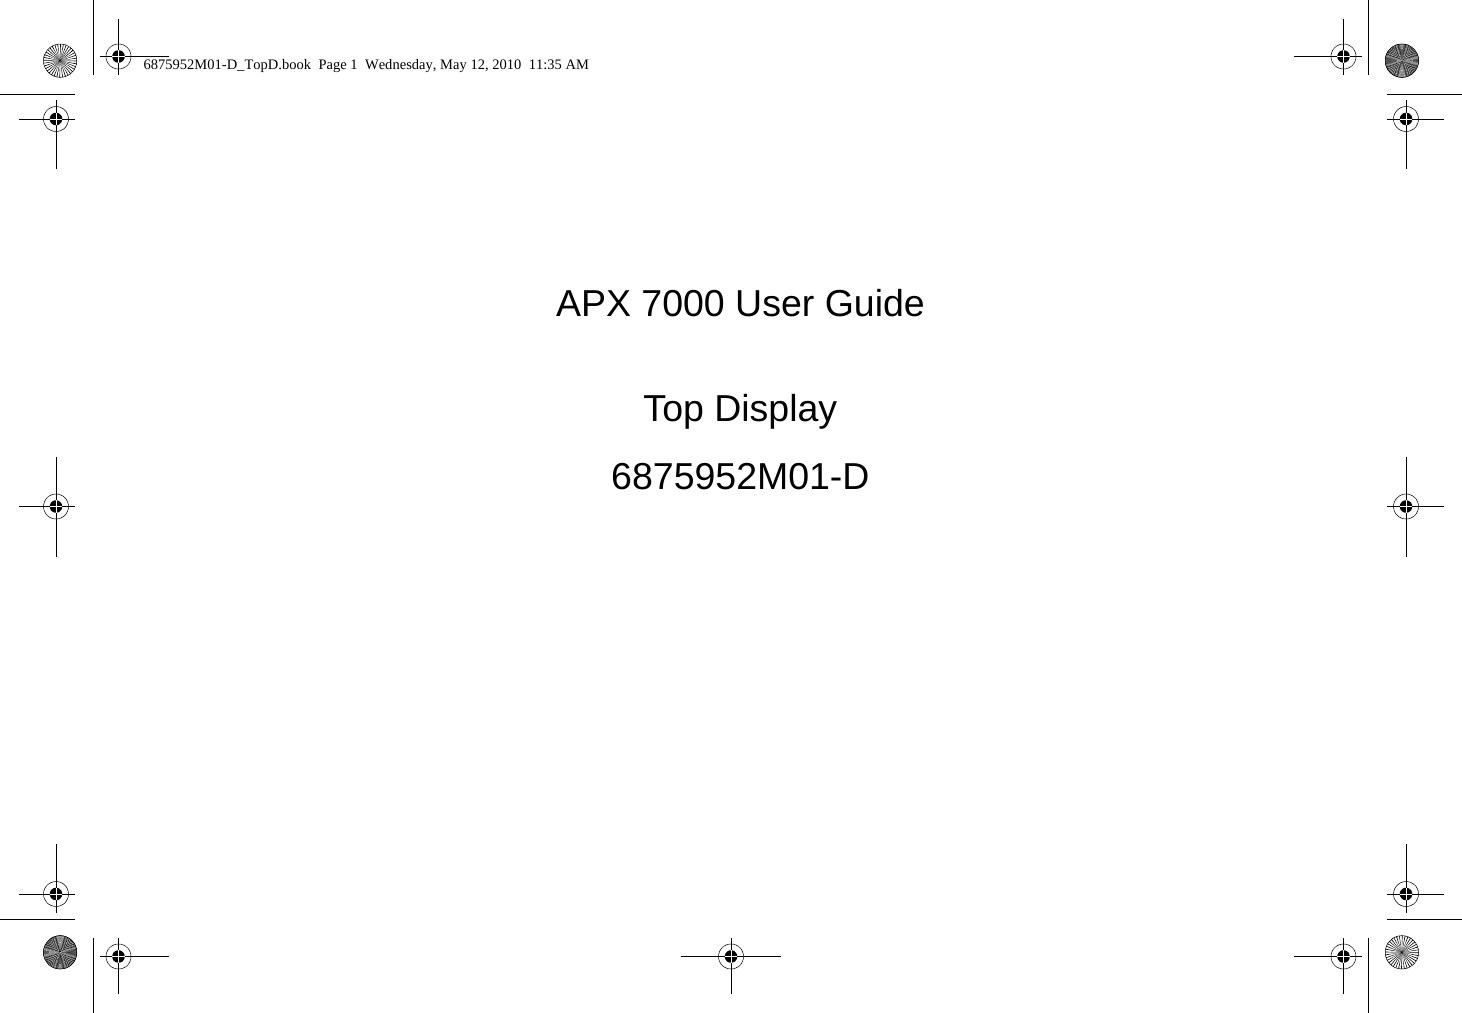 APX 7000 User GuideTop Display6875952M01-D6875952M01-D_TopD.book  Page 1  Wednesday, May 12, 2010  11:35 AM